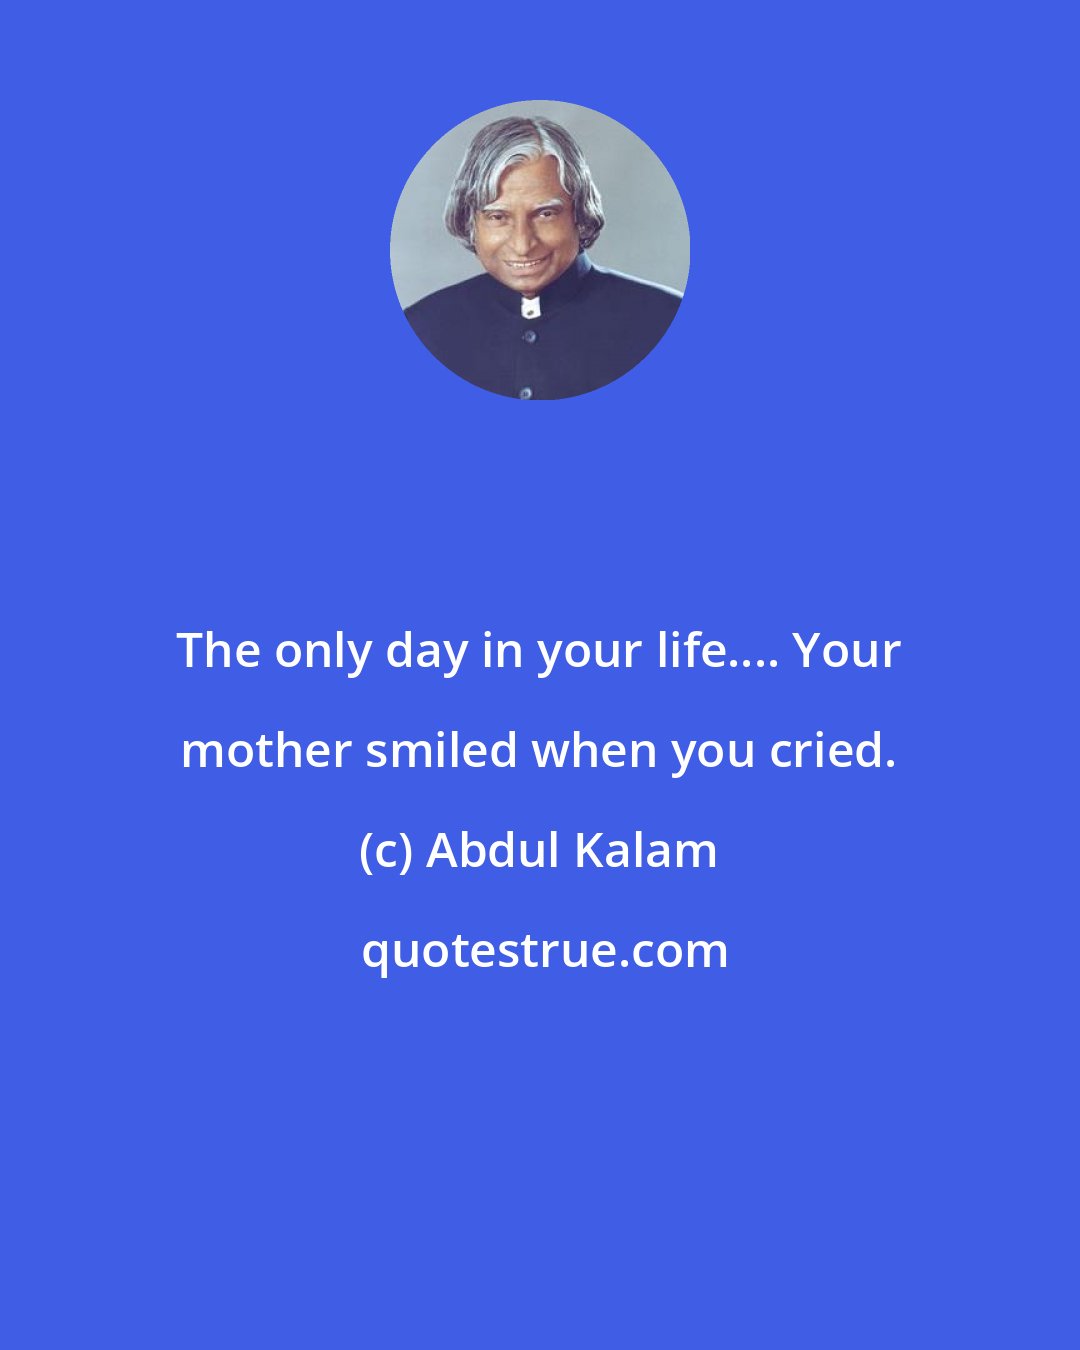 Abdul Kalam: The only day in your life.... Your mother smiled when you cried.